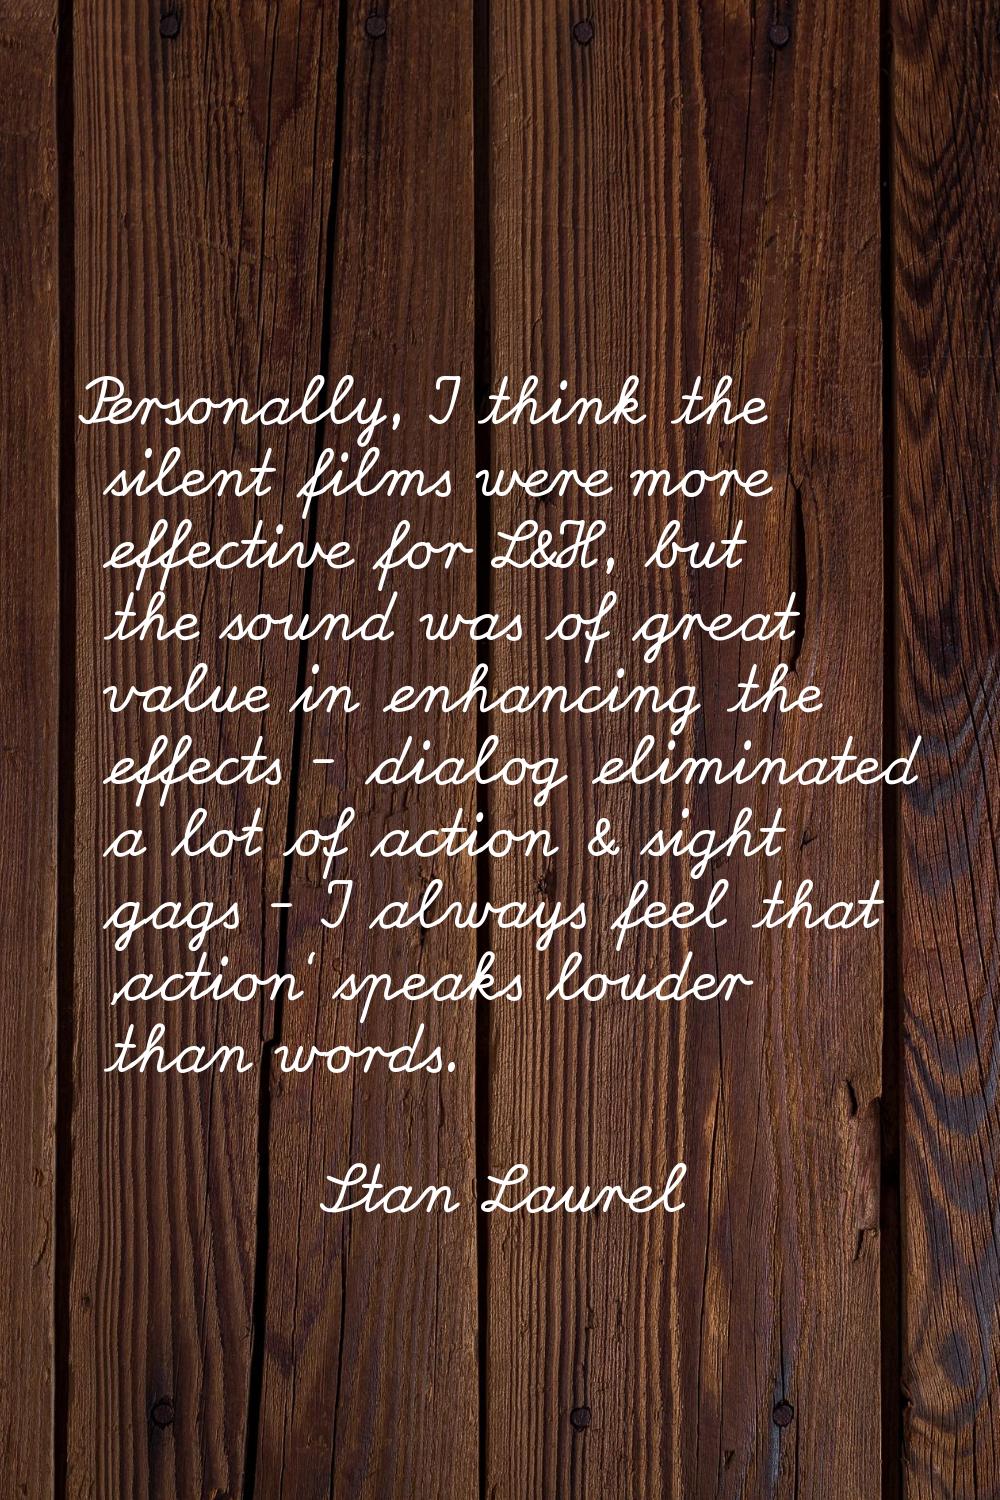 Personally, I think the silent films were more effective for L&H, but the sound was of great value 